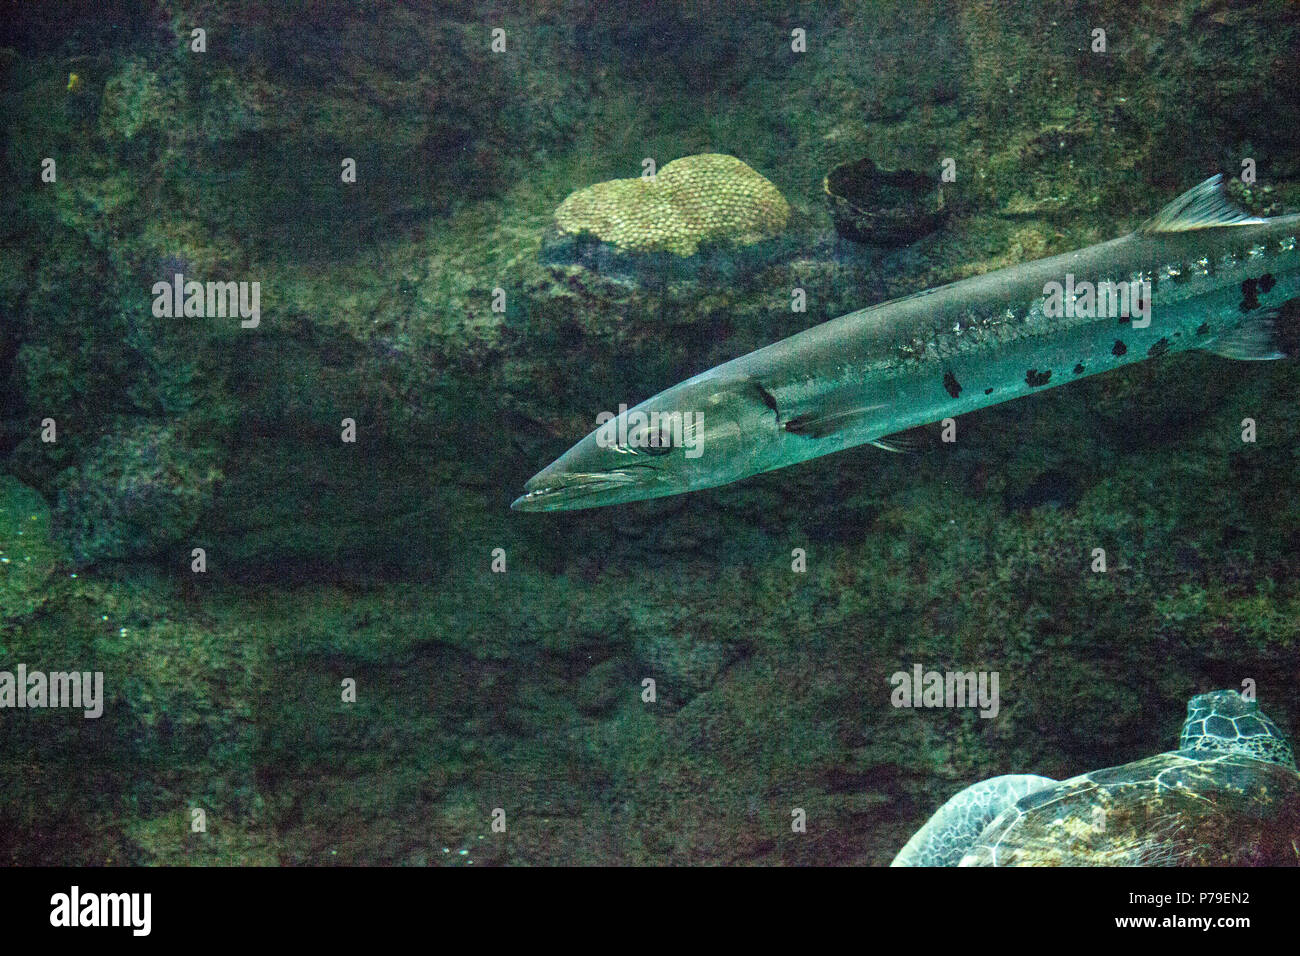 Giant Barracuda fish Sphyraena barracuda is a ray-finned fish found in subtropical oceans. Stock Photo